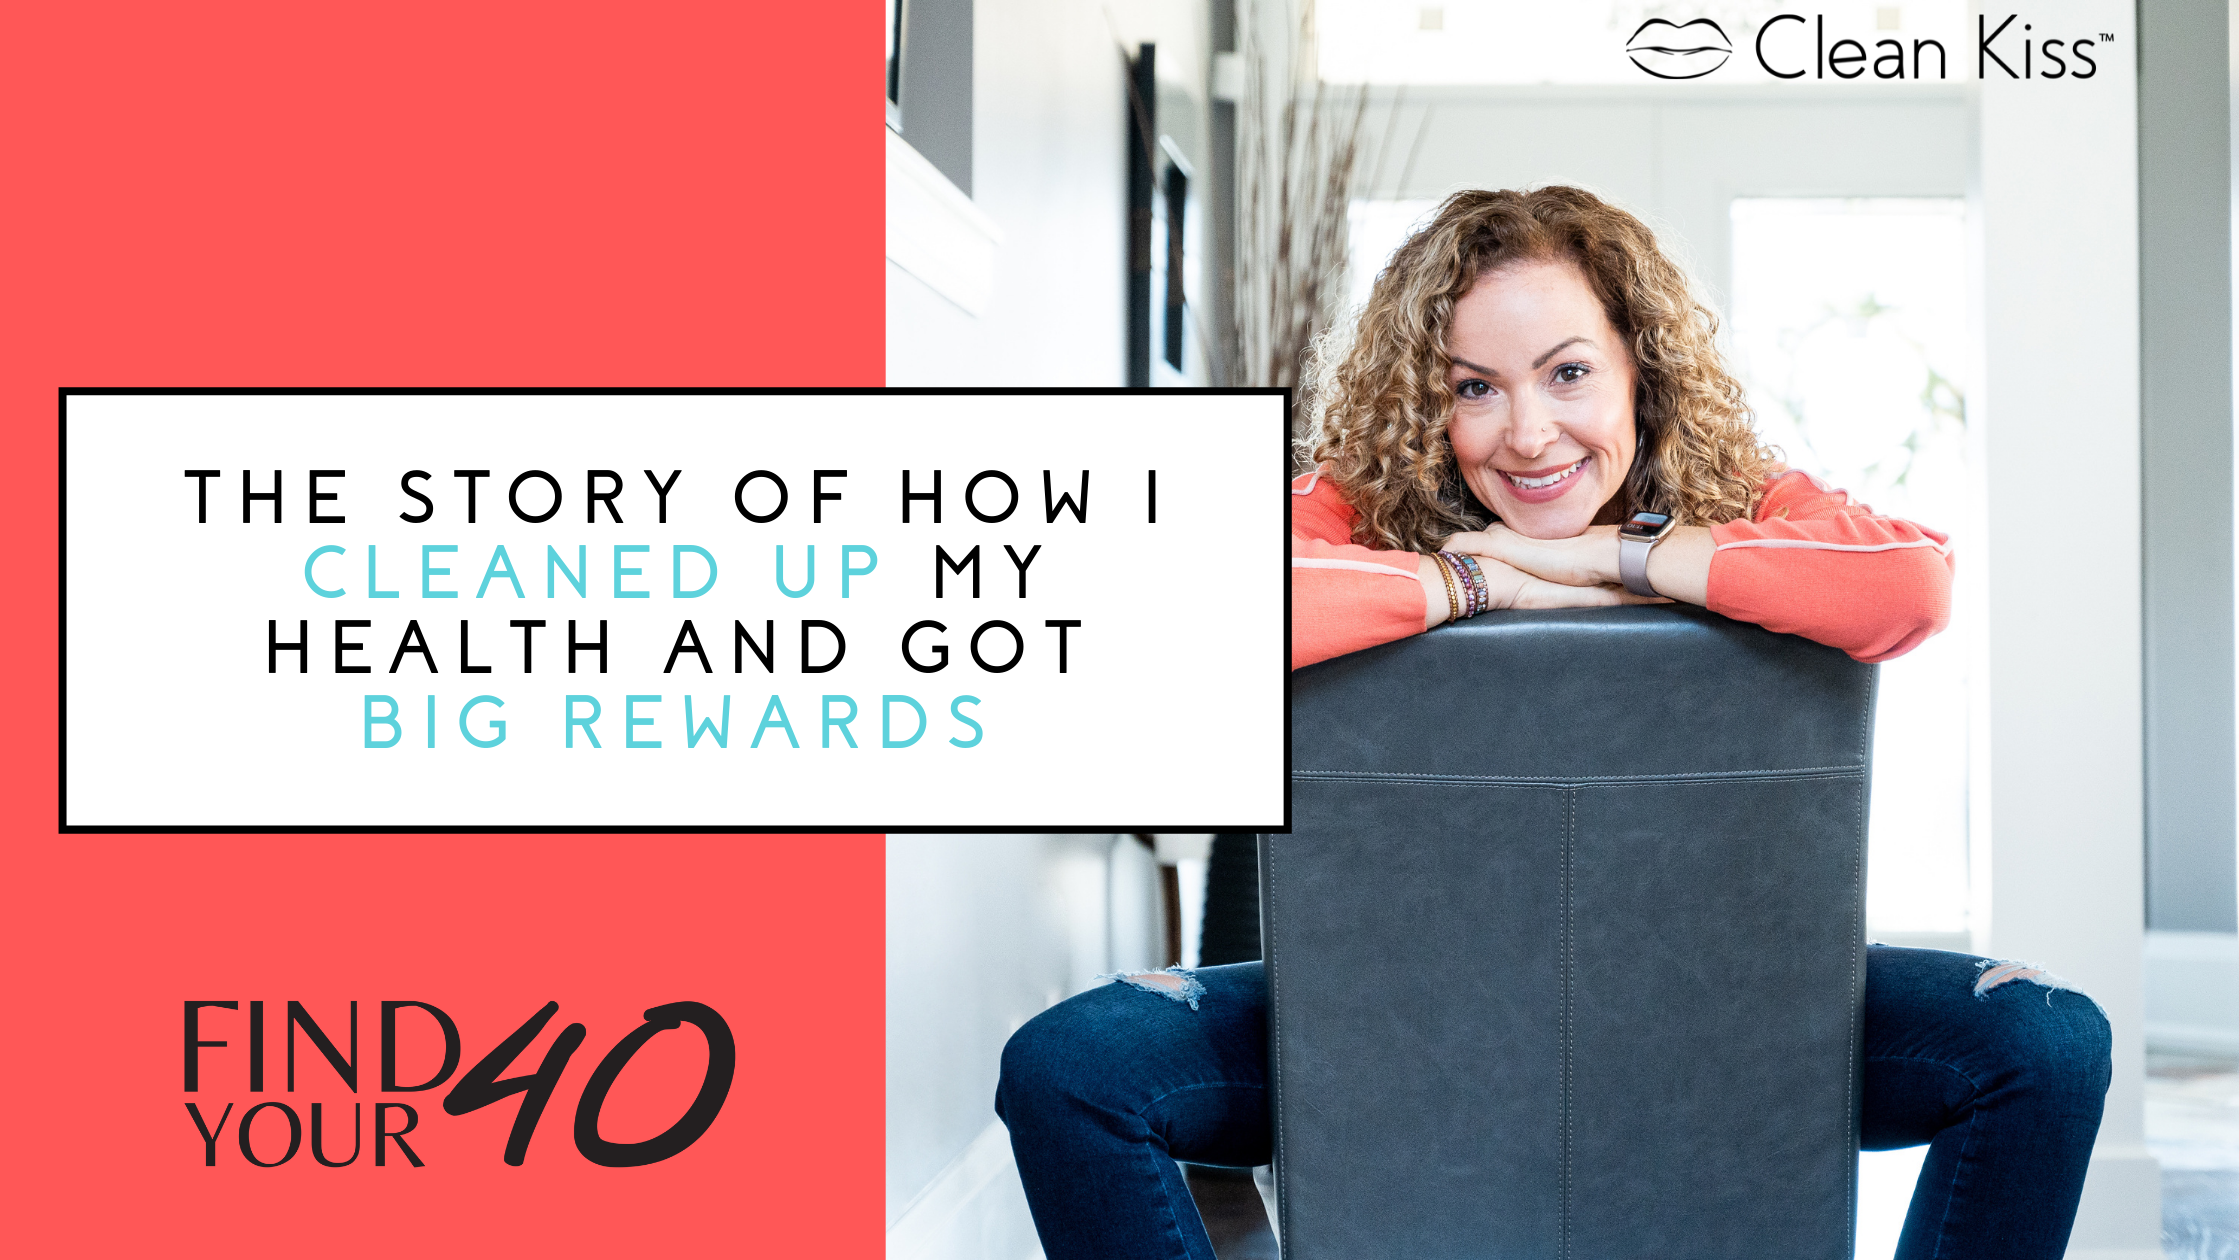 The Story of How I Cleaned Up My Health and Got Big Rewards